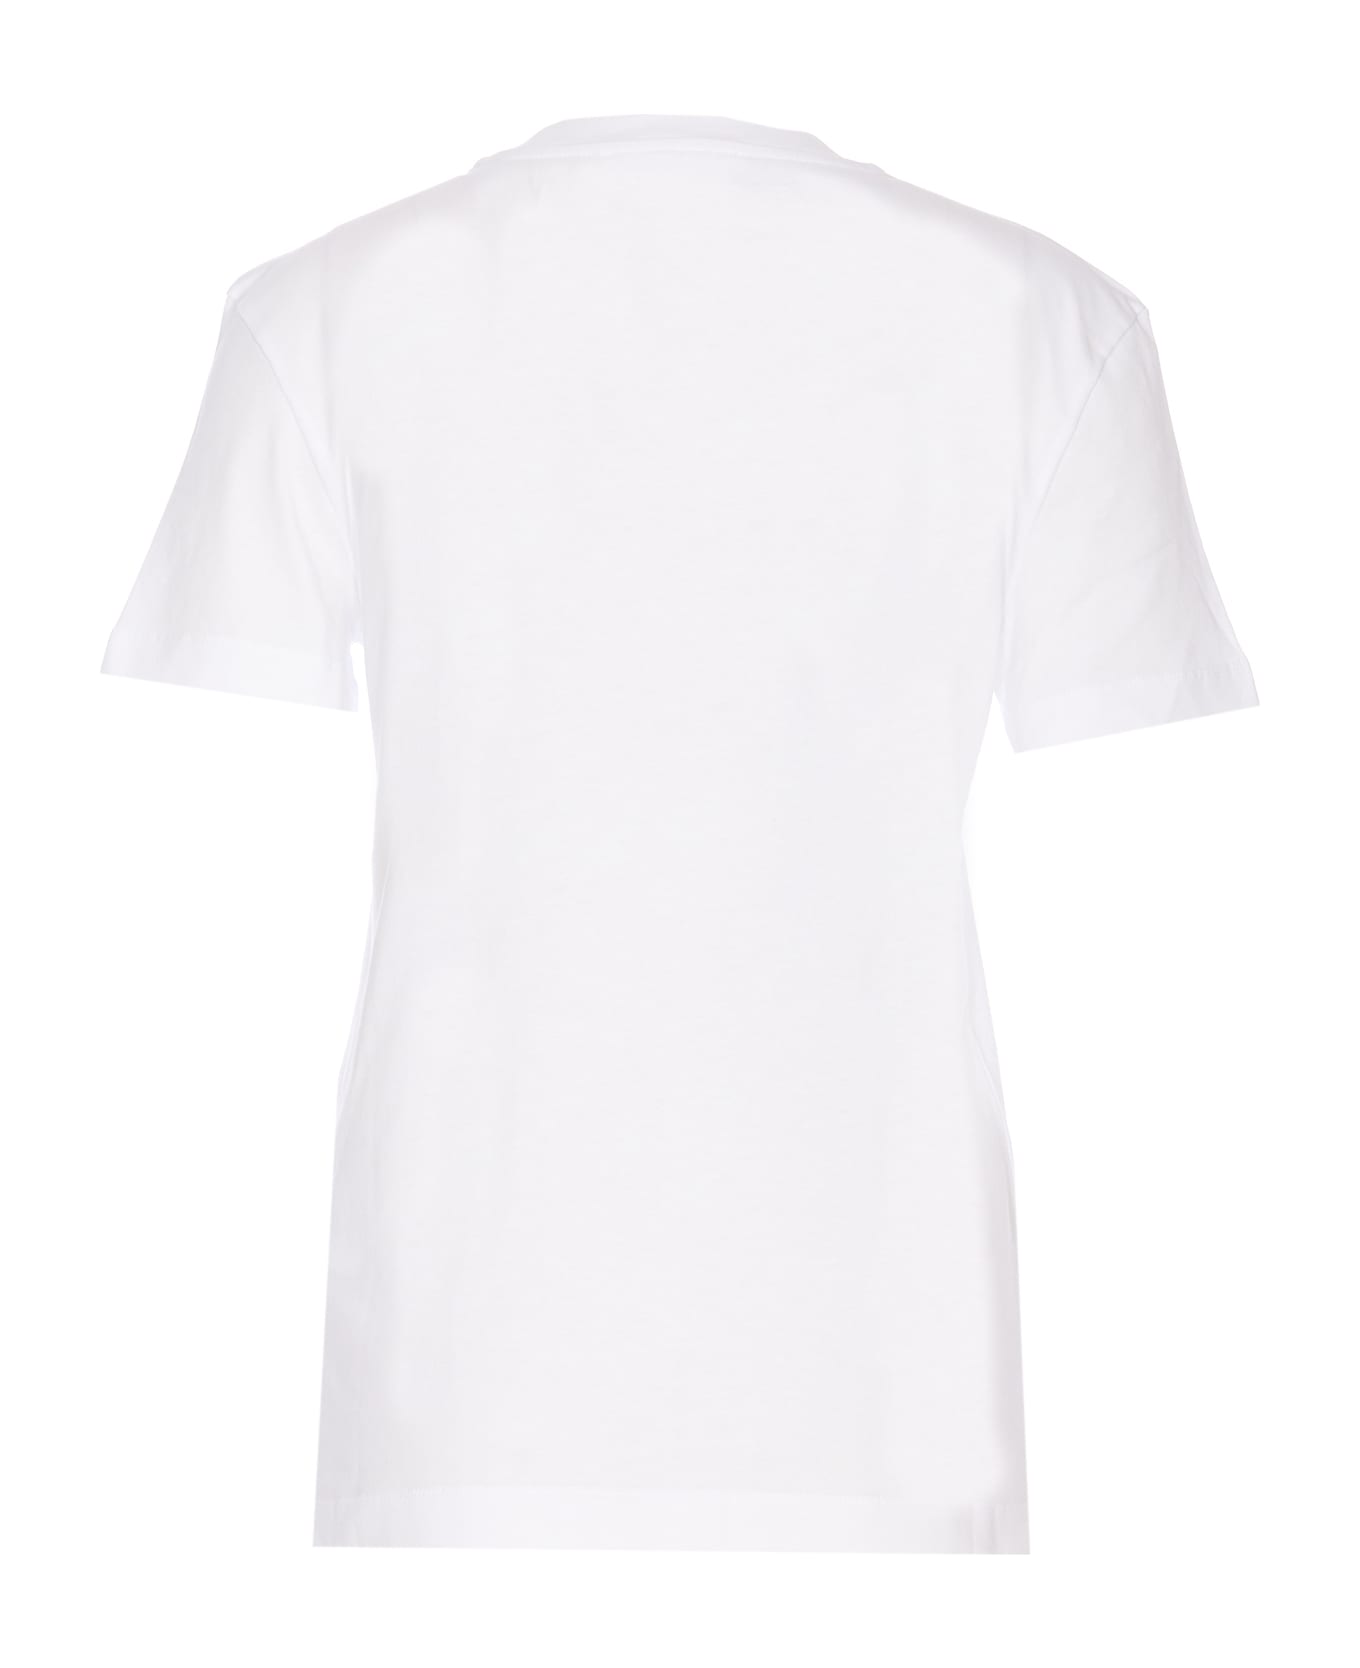 SportMax Embroidered T-shirt With Paillettes - White